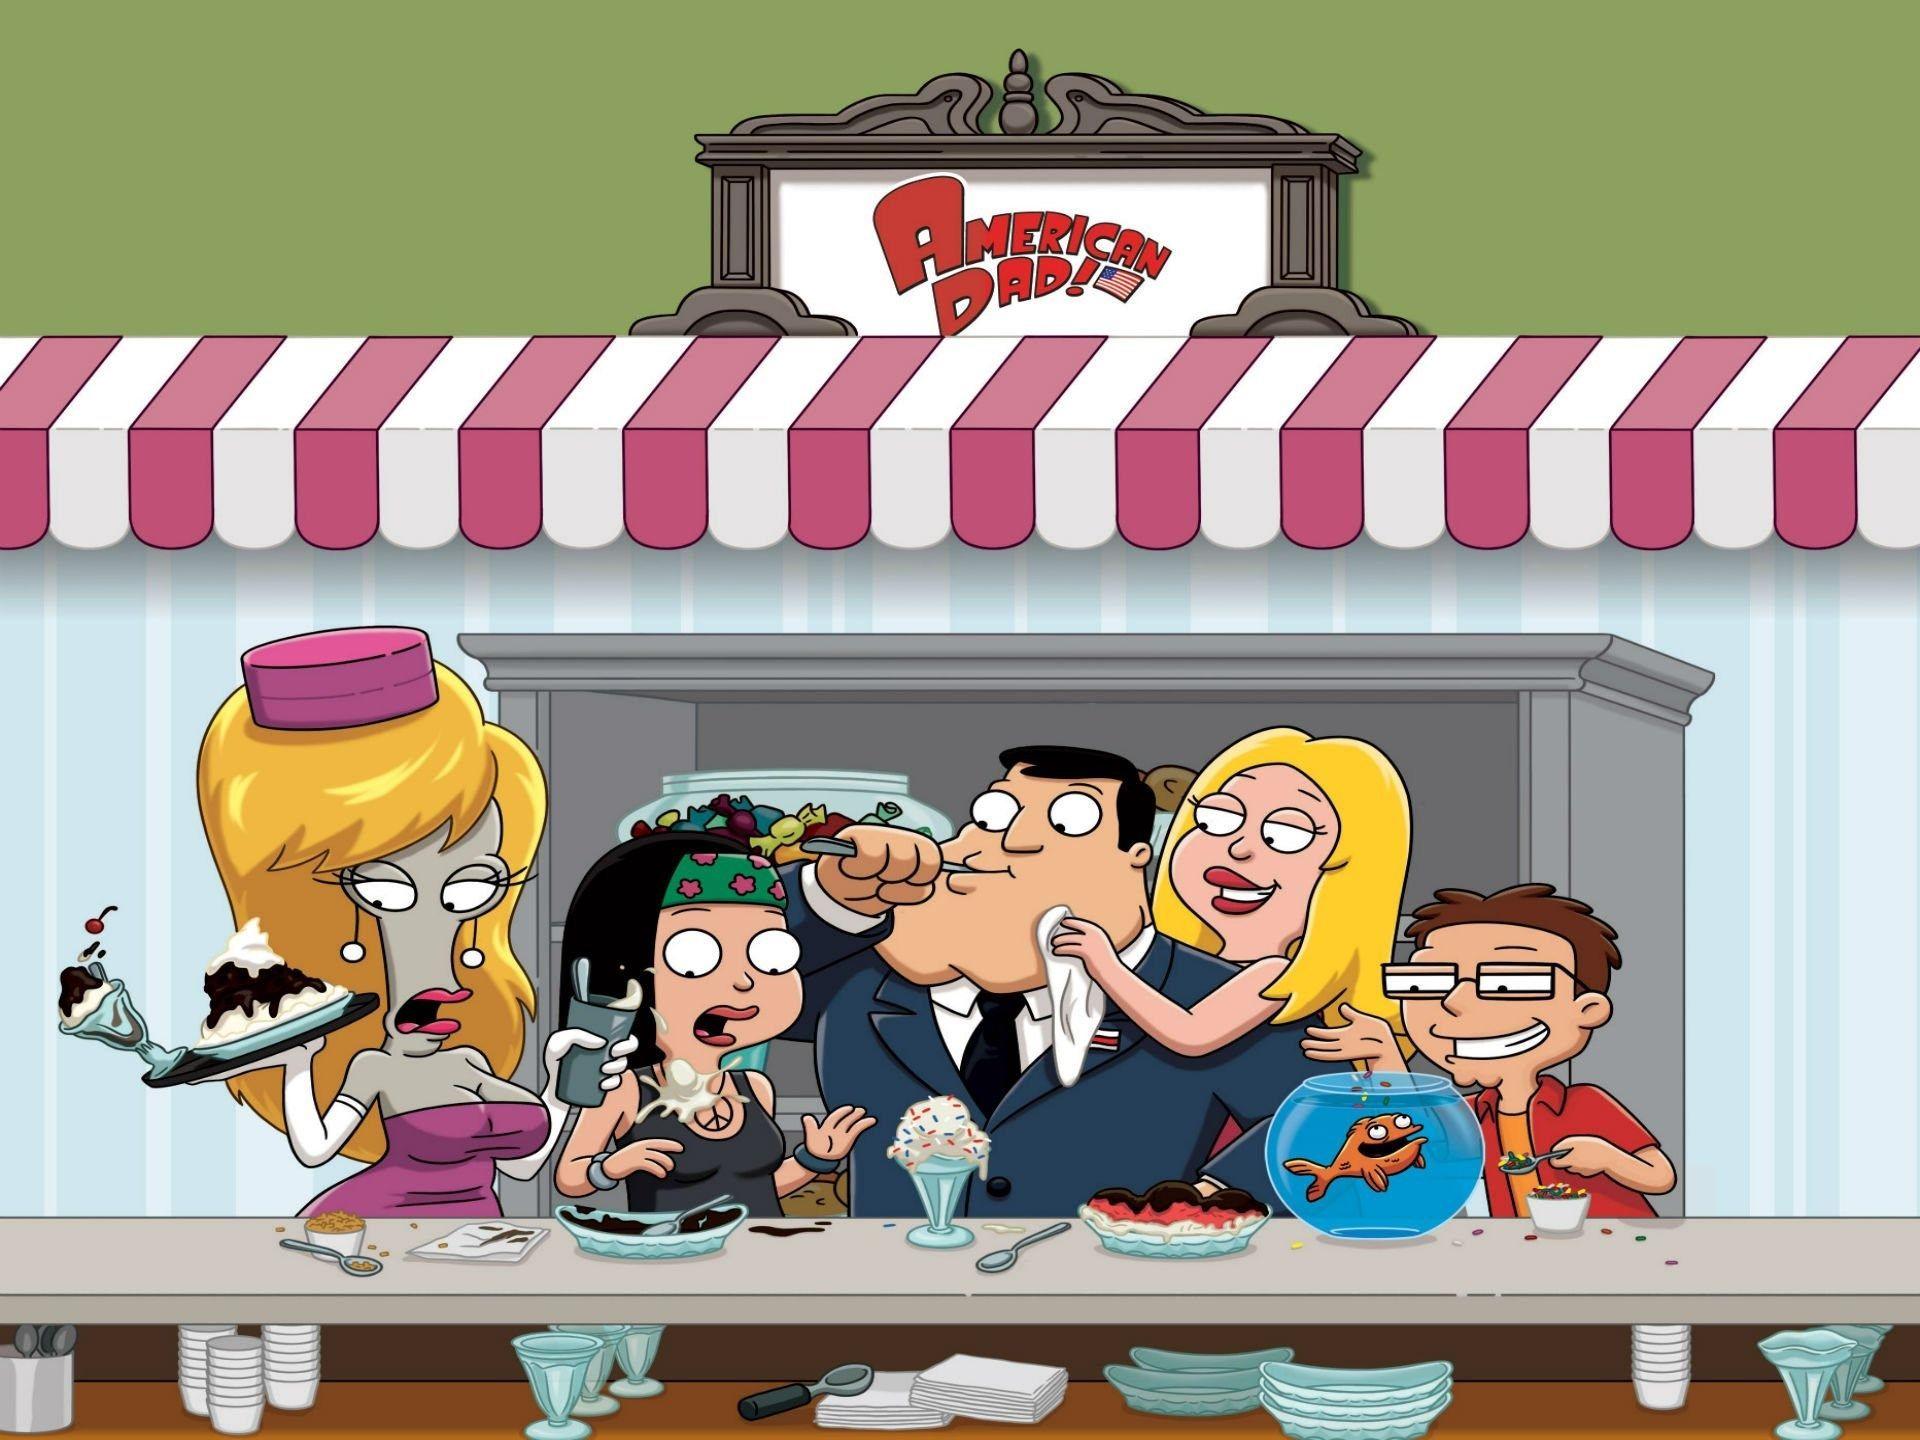 American Dad Wallpapers Top Free American Dad Backgrounds Wallpaperaccess